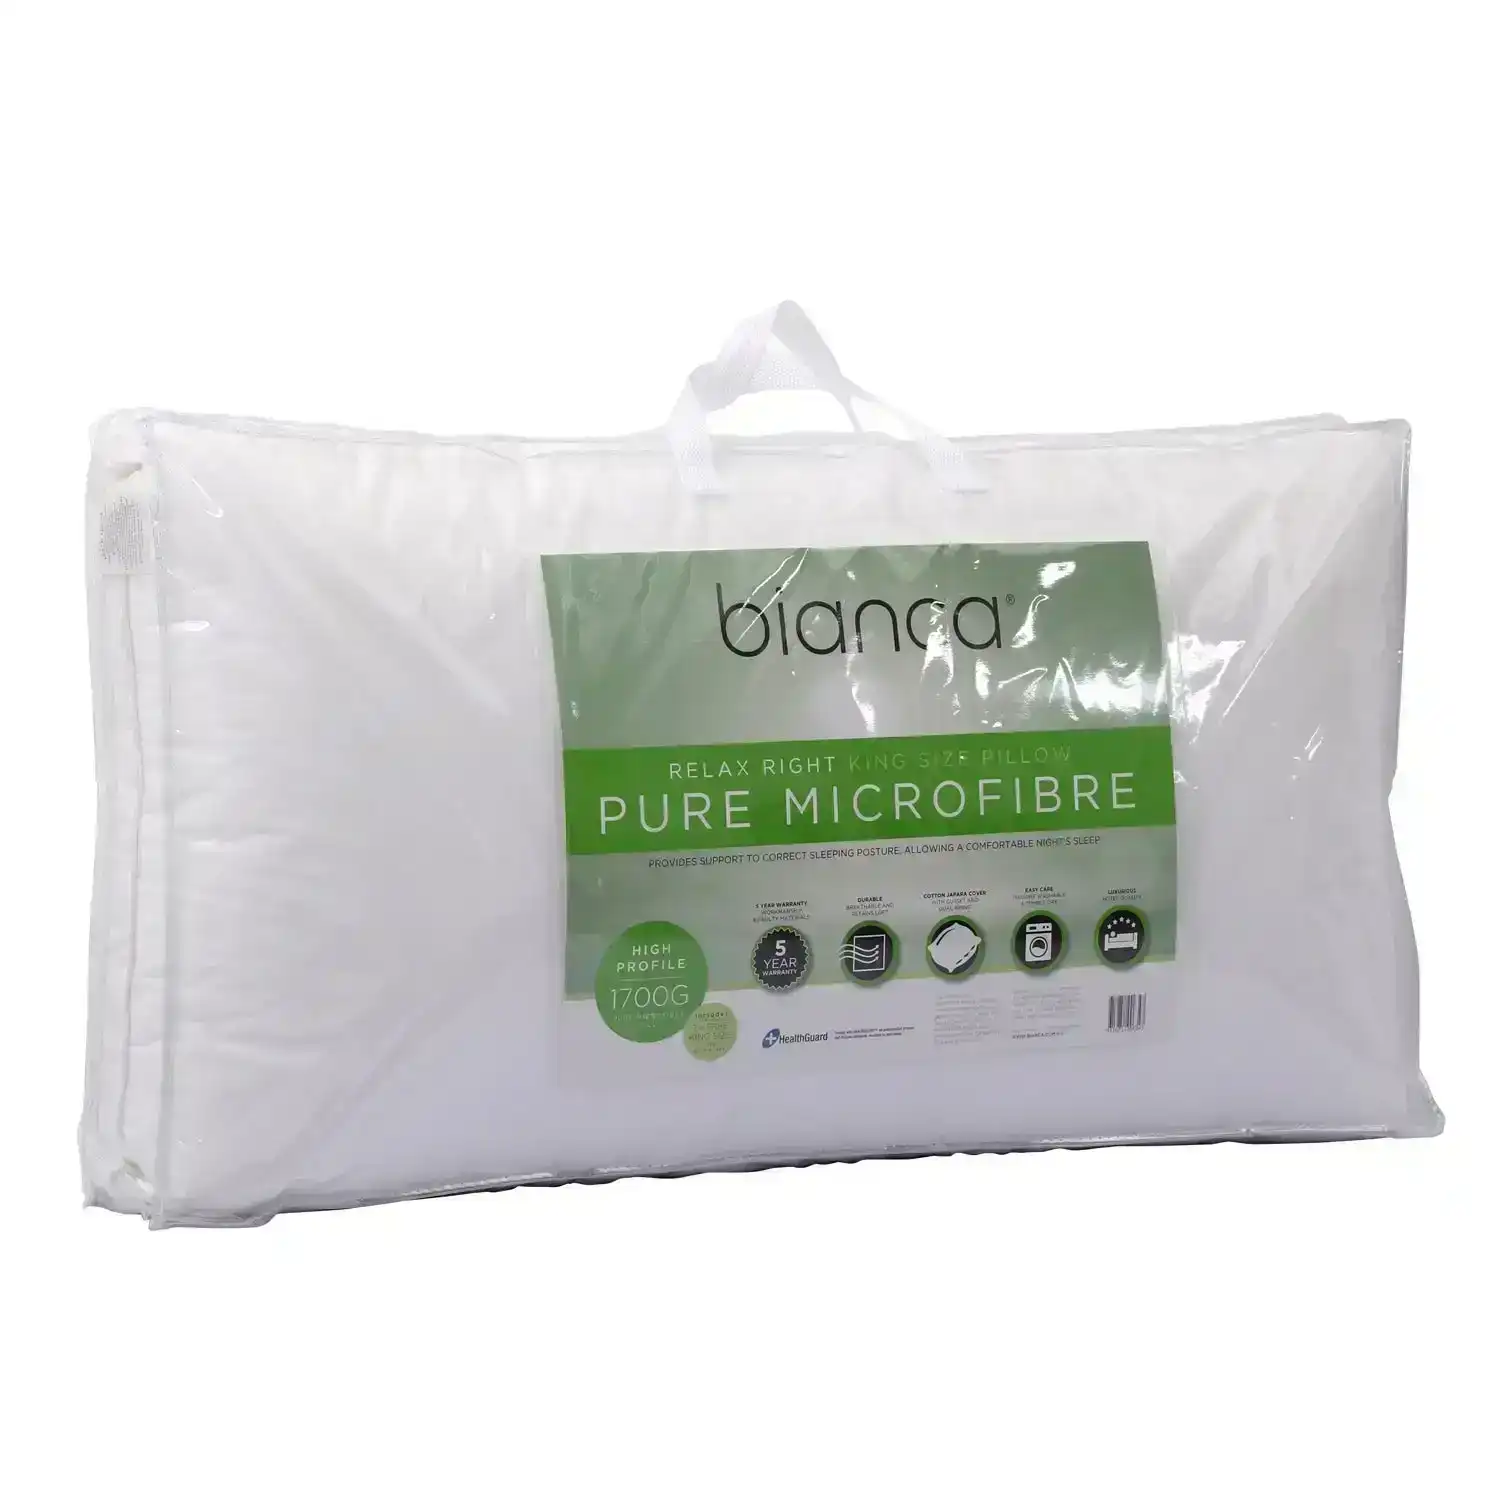 Bianca Bedding RELAX RIGHT PURE MICROFIBRE KING PILLOW PROFILE 1700G